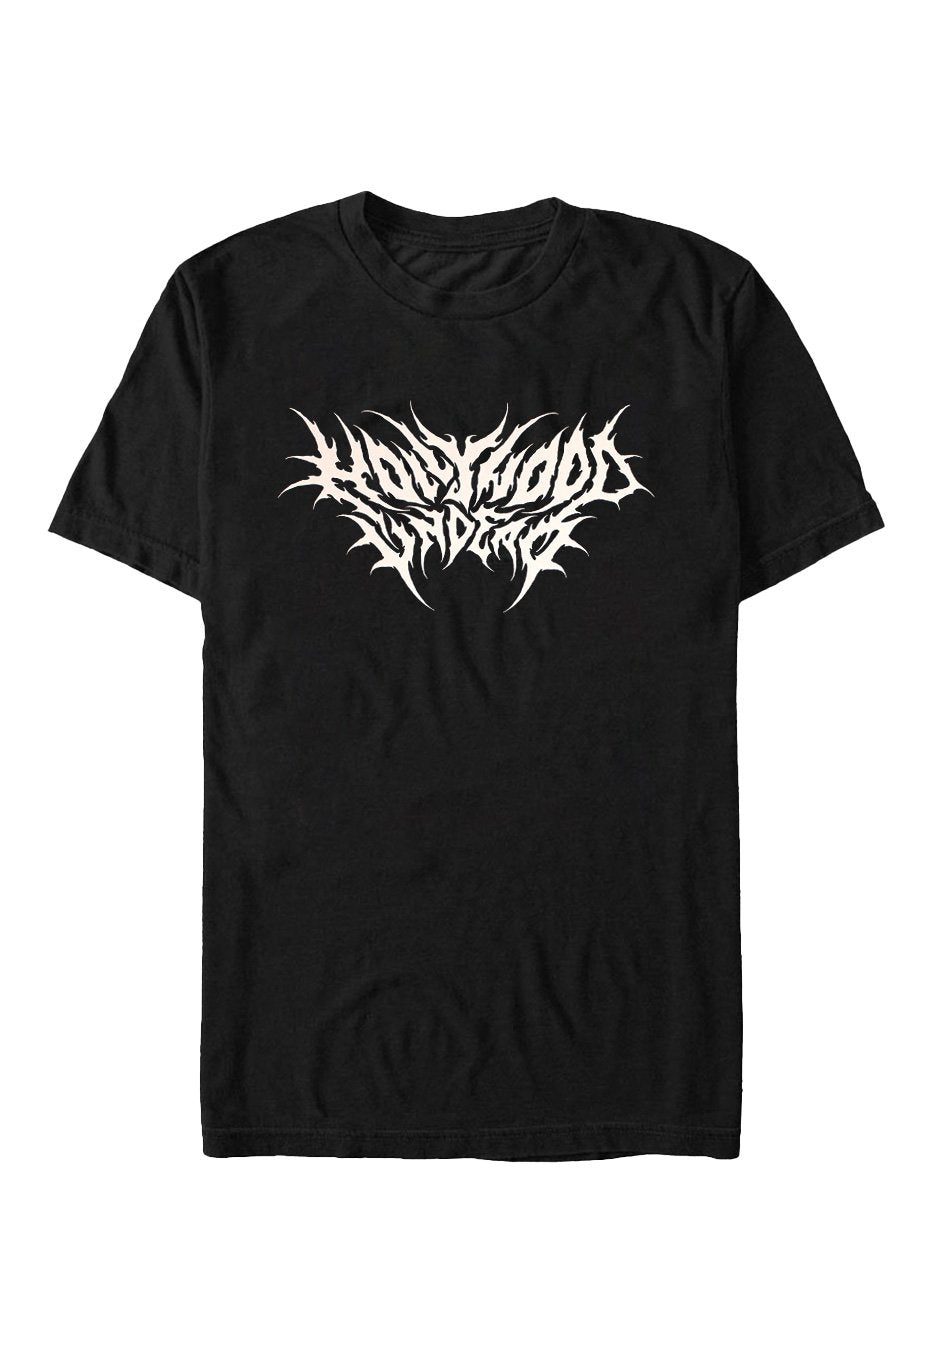 Hollywood Undead - Metal Logo - T-Shirt | Neutral-Image